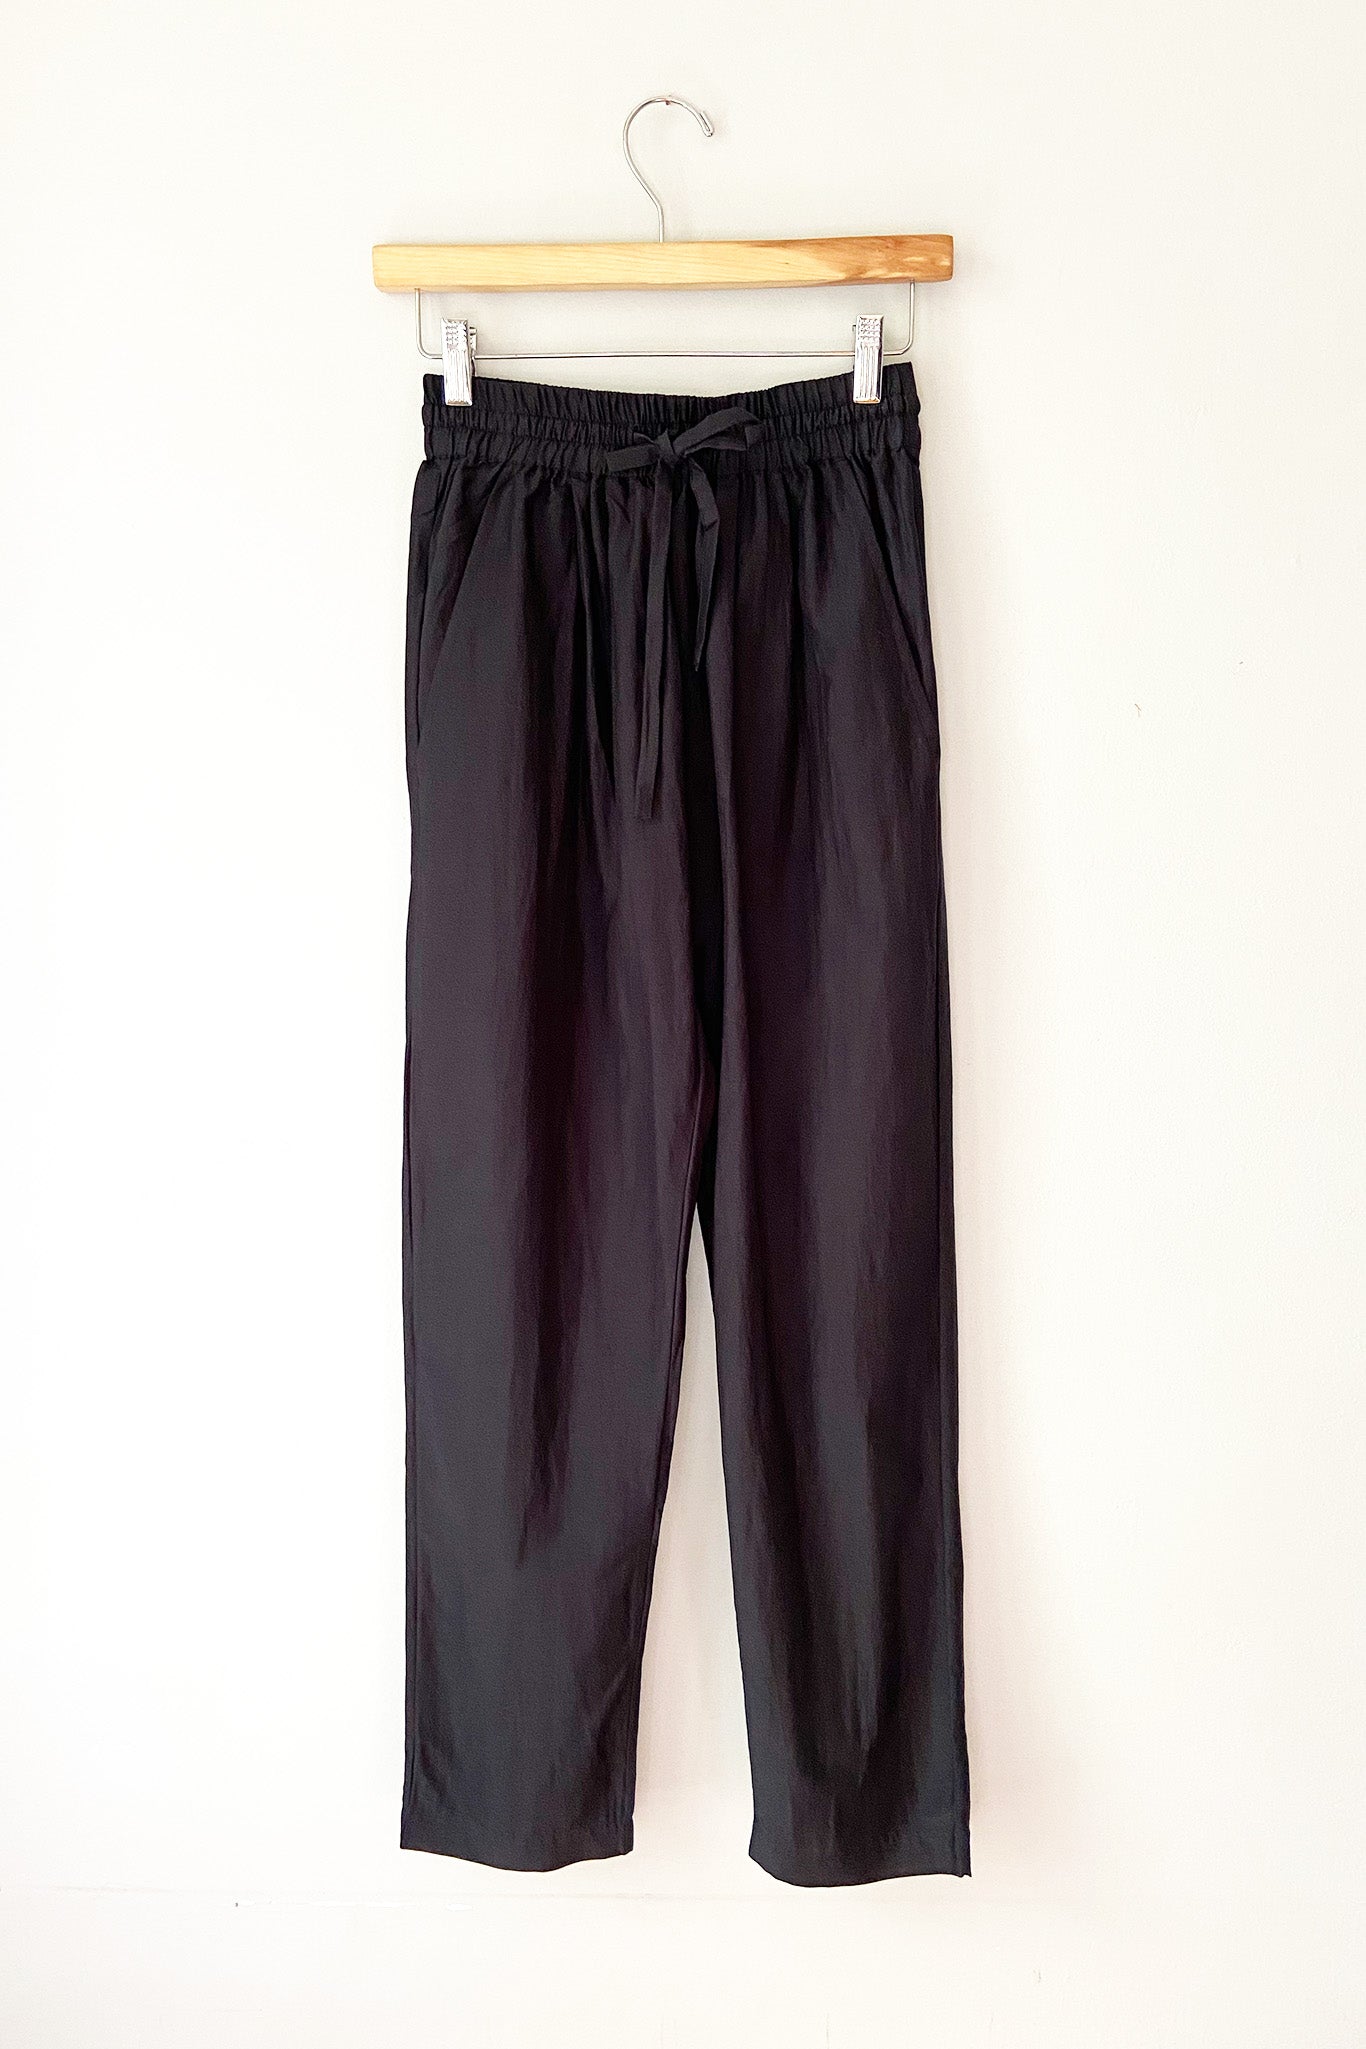 Cotton summer drawstring pant with tapered legs. Brooklyn Style